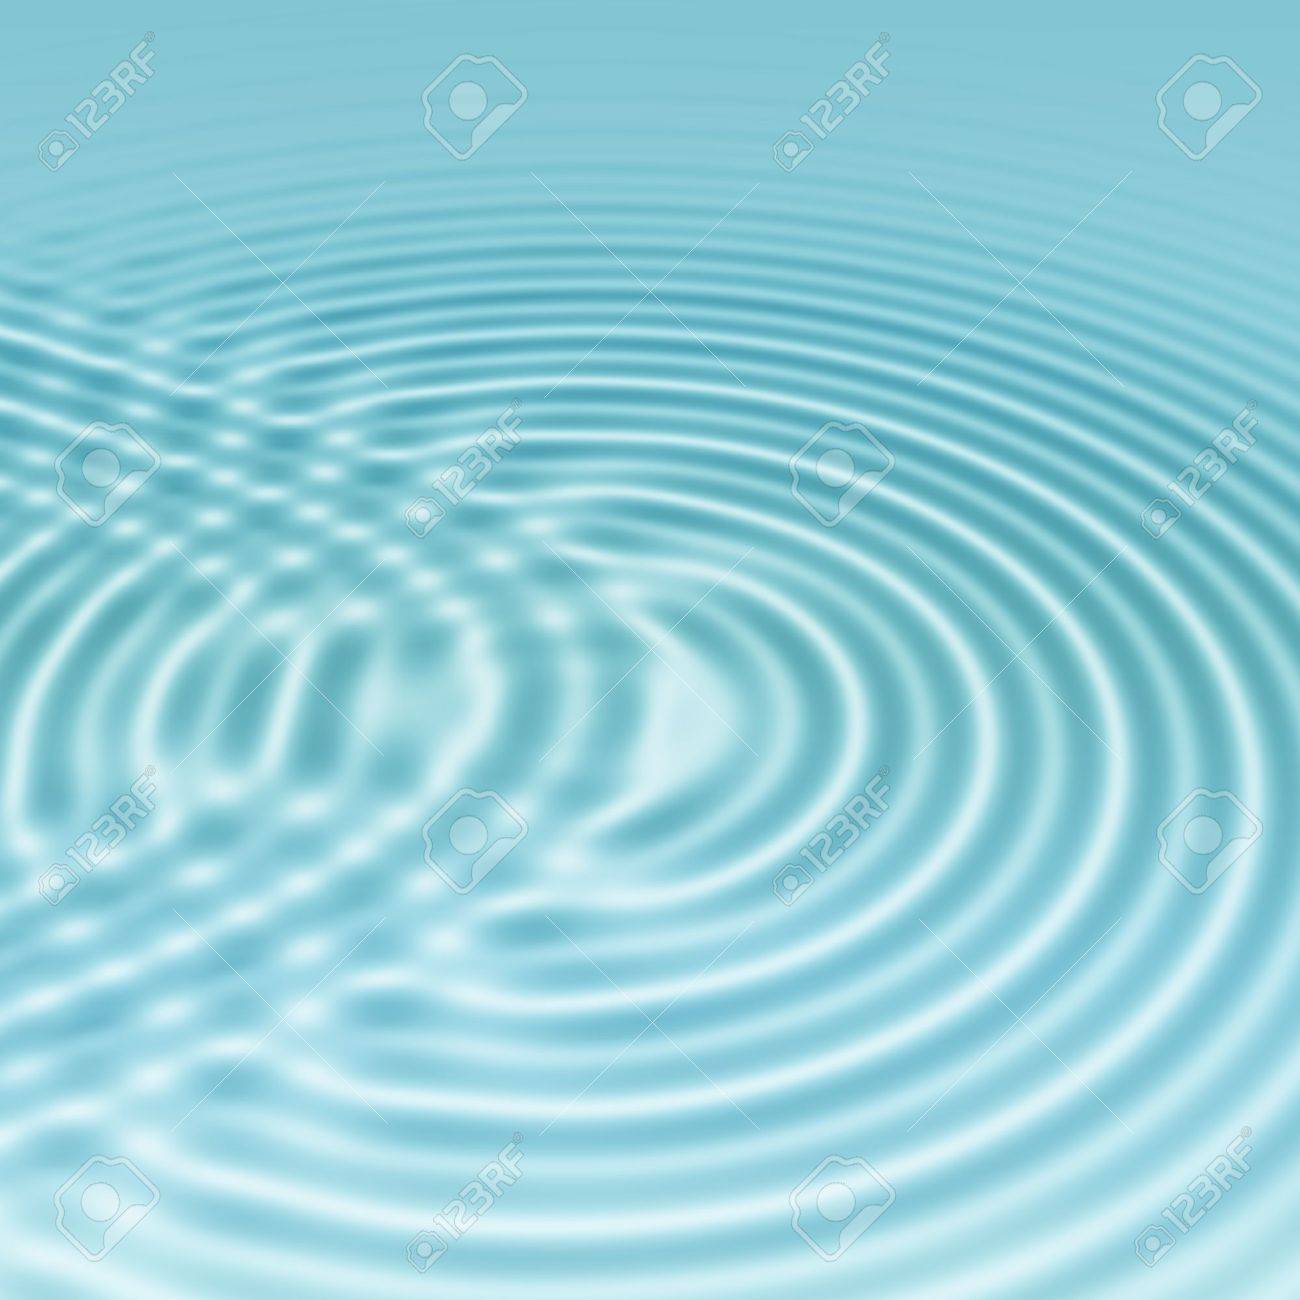 Elegant Clear Blue Ripples Background With Interference Stock